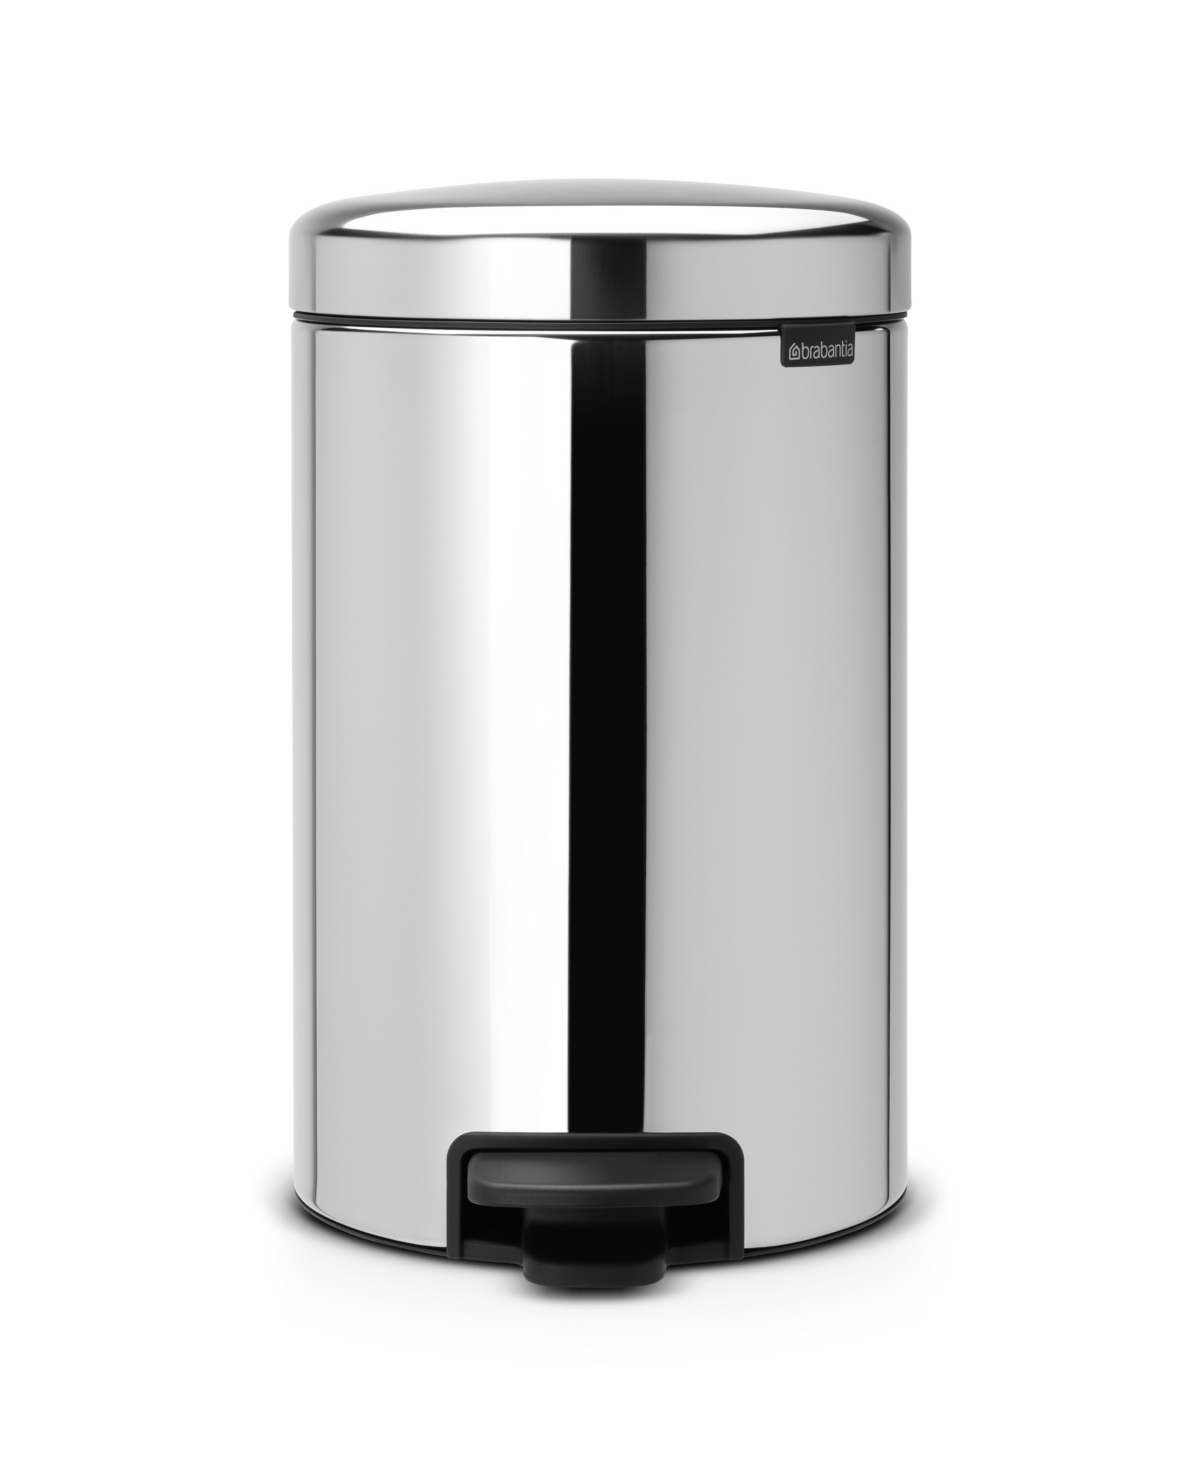 Brabantia New Icon Step On Trash Can, 3.2 Gallon, 12 Liter In Brilliant Steel